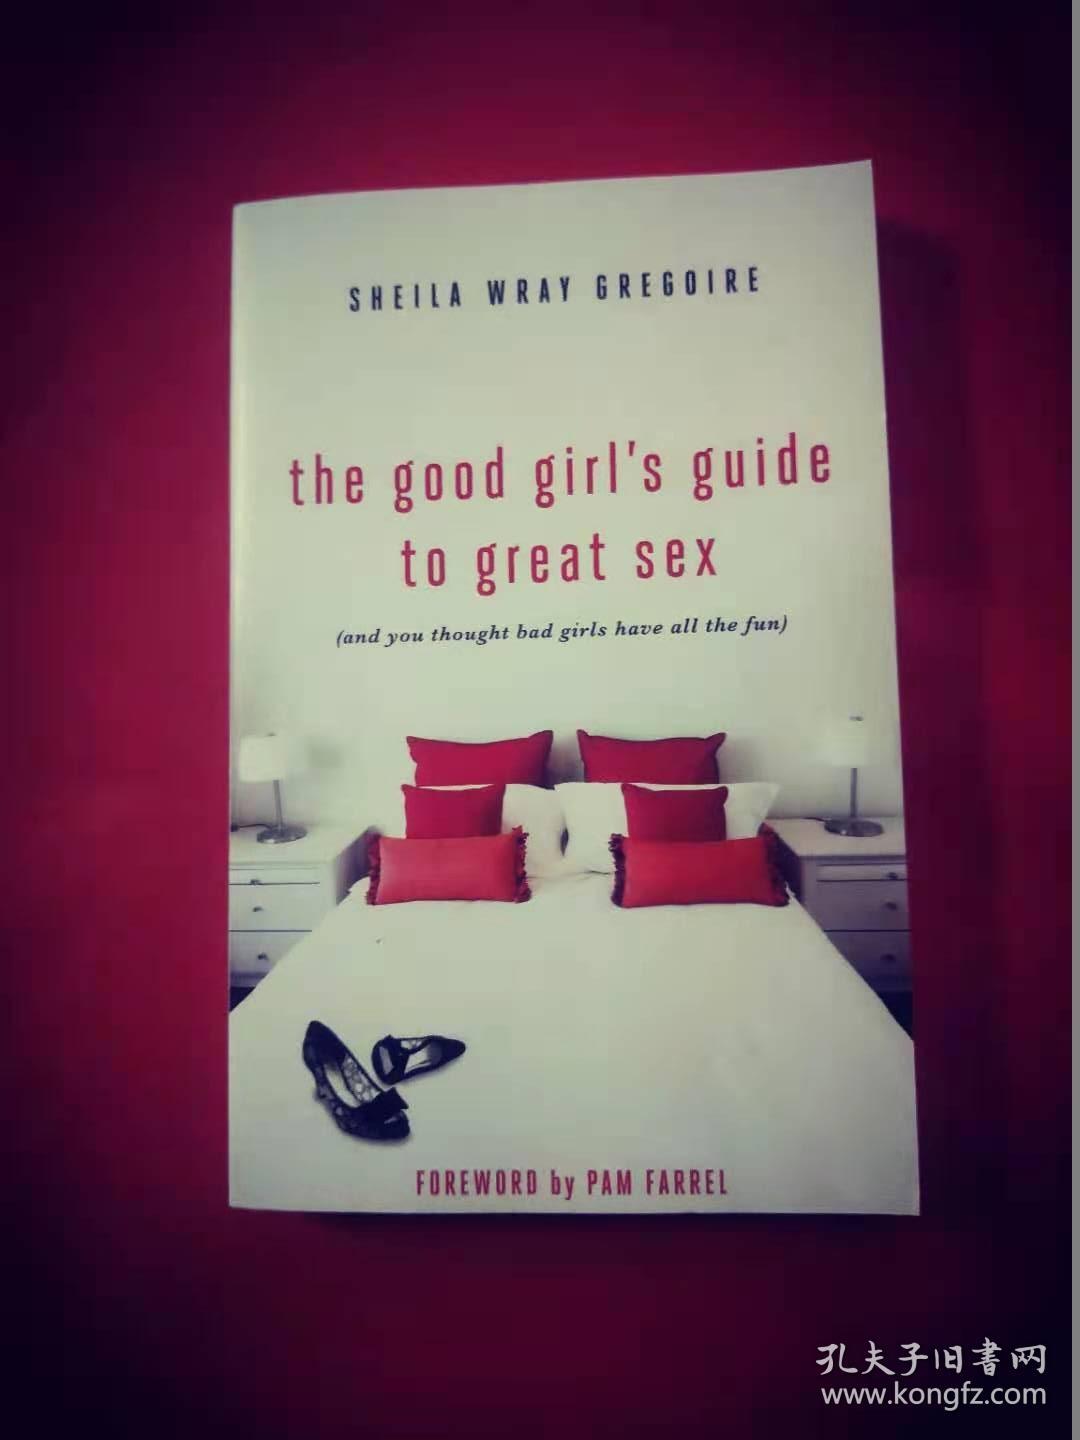 The good girl's guide to great sex